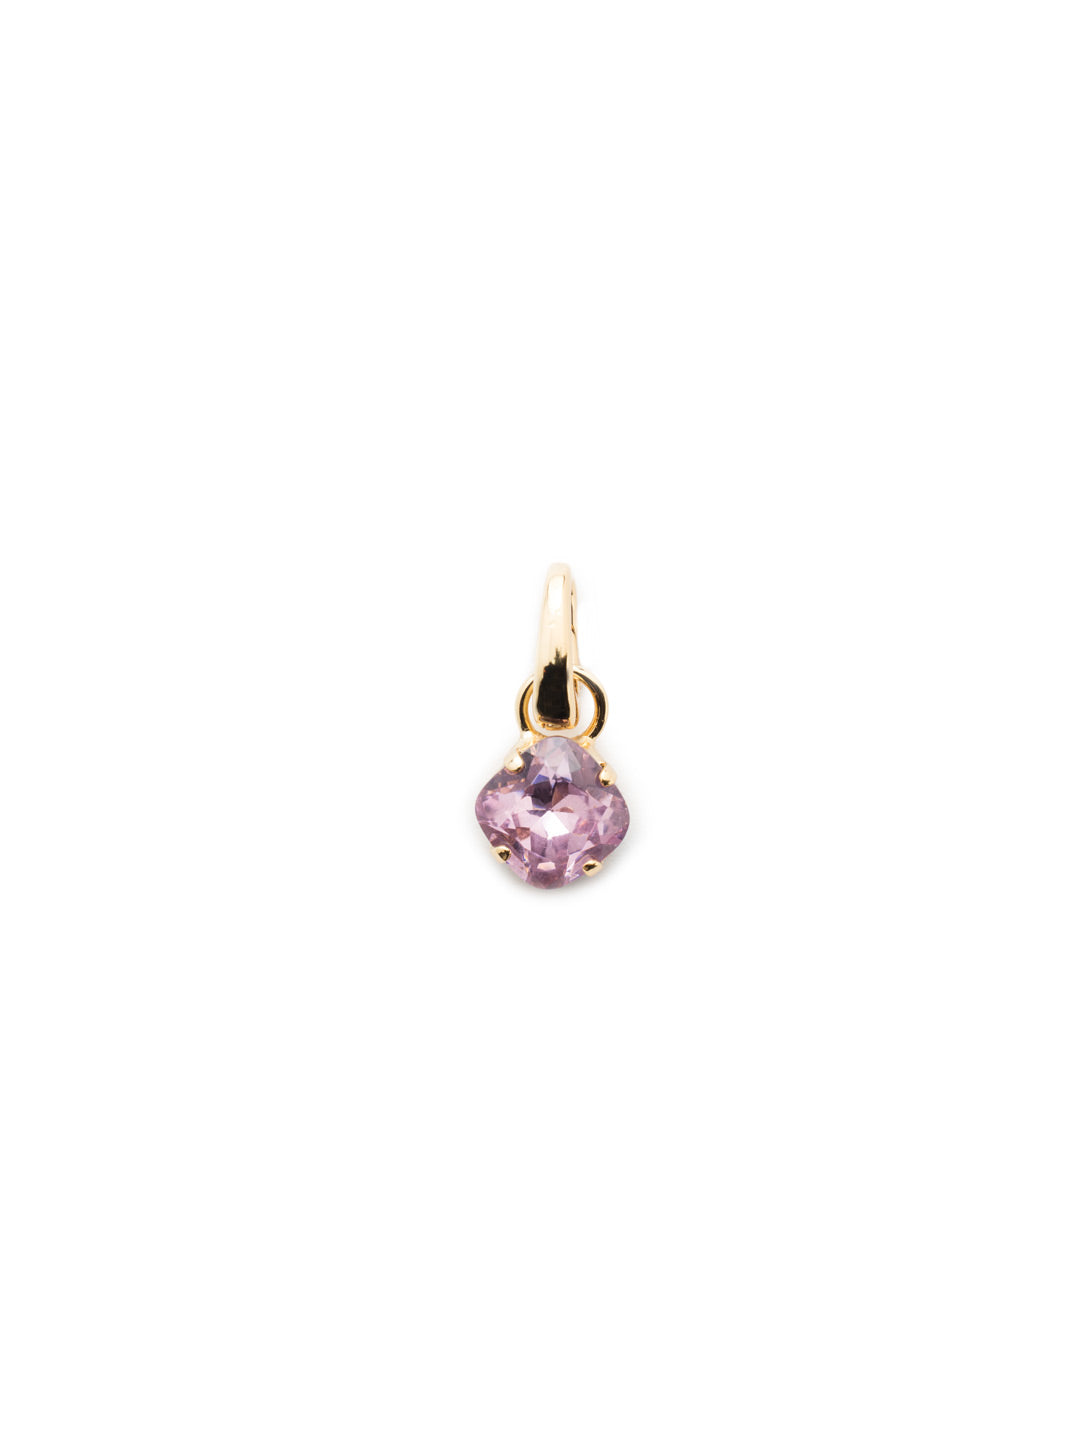 Birthstone Charm - CEU1BGLTR - <p>A cushion-cut crystal designed in your beautiful birthstone. Simply attach it to our favorite chain for an everyday look. From Sorrelli's Light Rose collection in our Bright Gold-tone finish.</p>